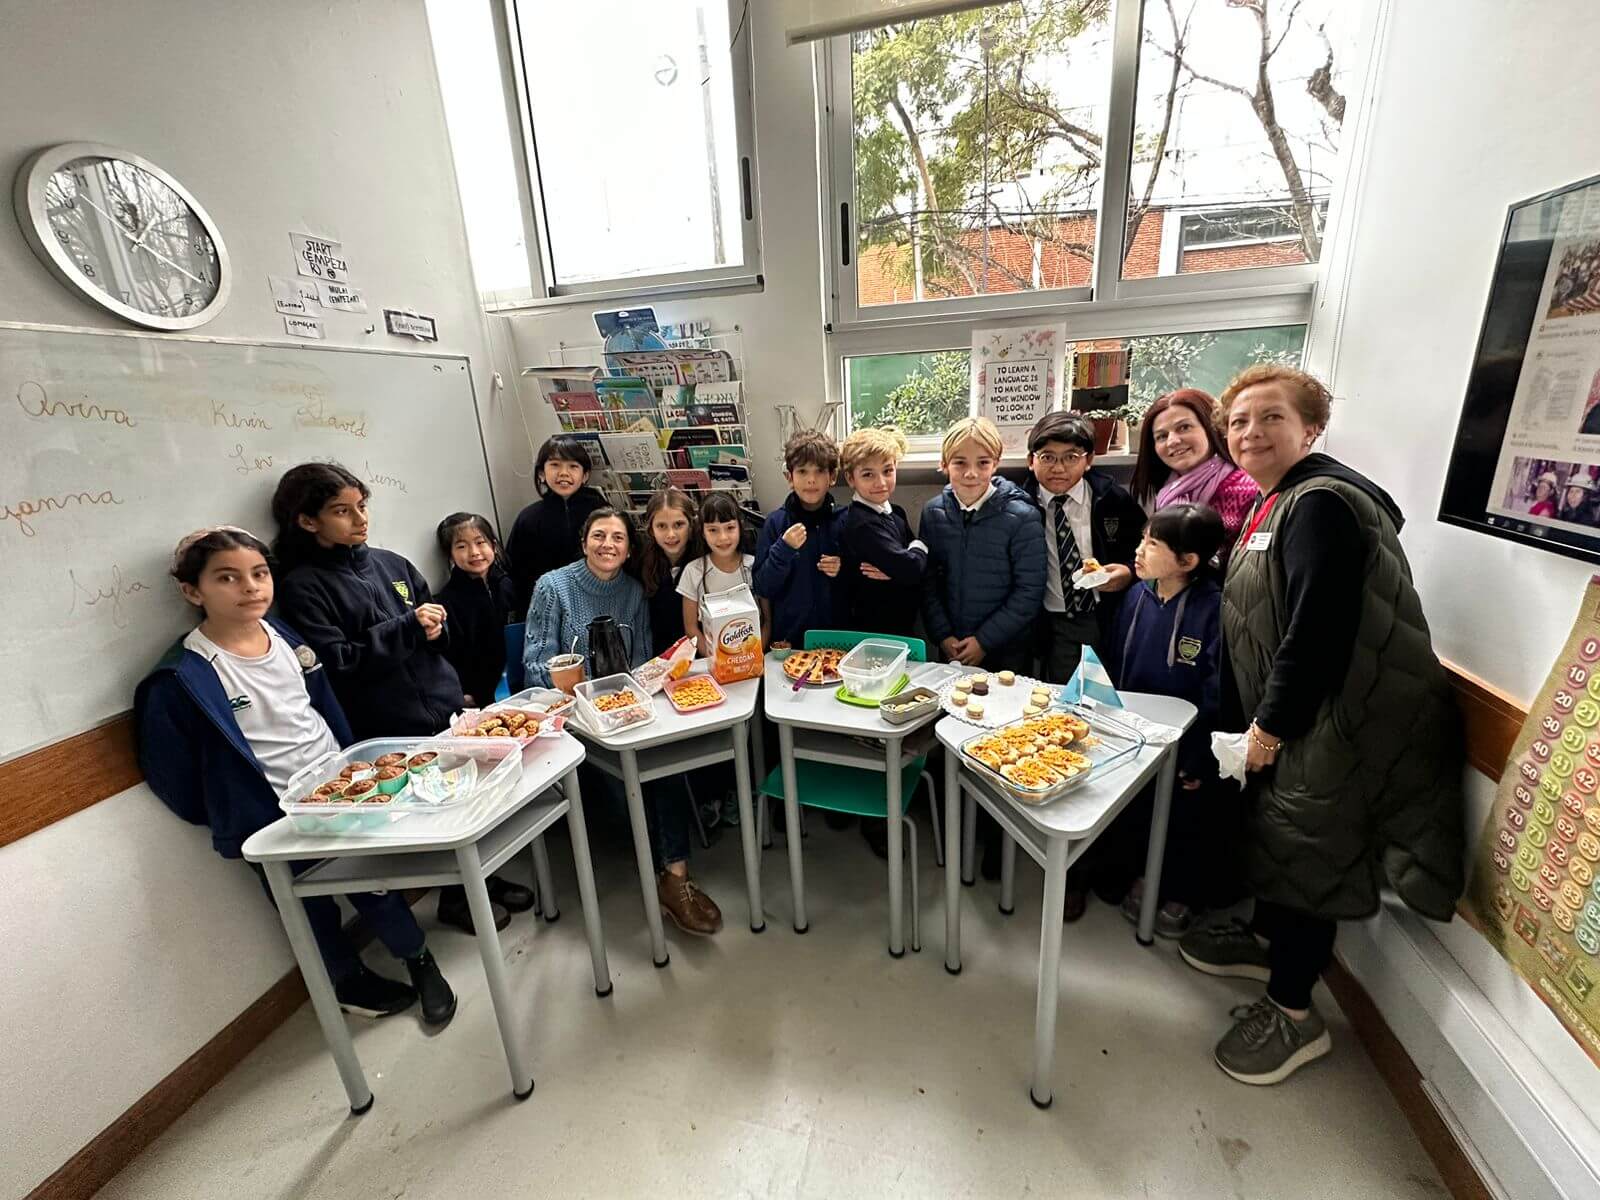 Global Citizenship – Spanish Immersion programme pic nic